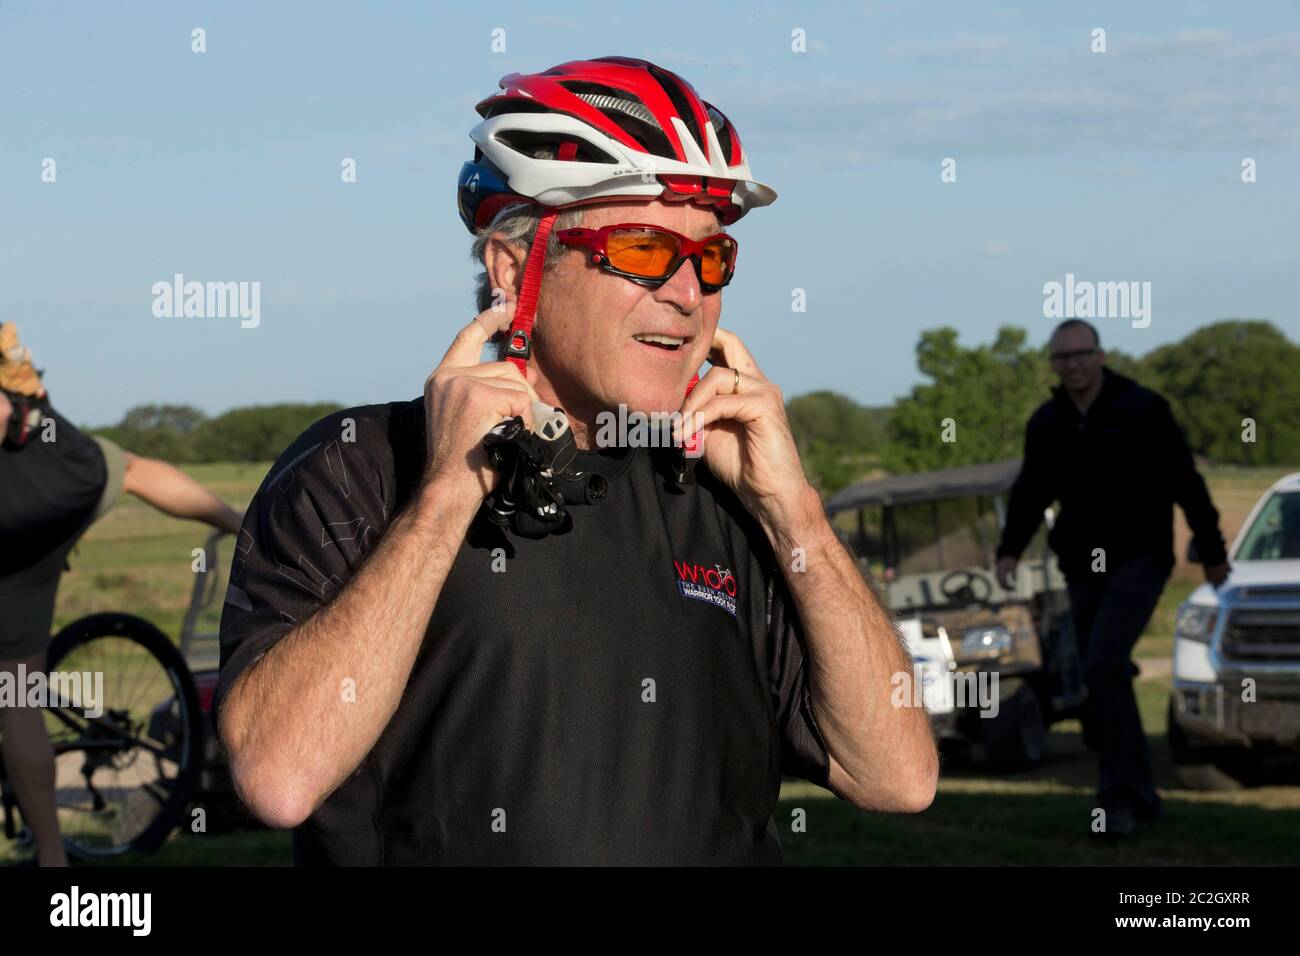 Crawford Texas USA, May 2 2014: Former President George W. Bush readies his headgear before leading a pack of bicycle riders through his Prairie Chapel Ranch outside Crawford, Texas in the fourth annual Wounded Warrior 100K. The three-day event featured 17 U.S. soldiers injured in recent combat in Iraq and Afghanistan.   ©Bob Daemmrich Stock Photo